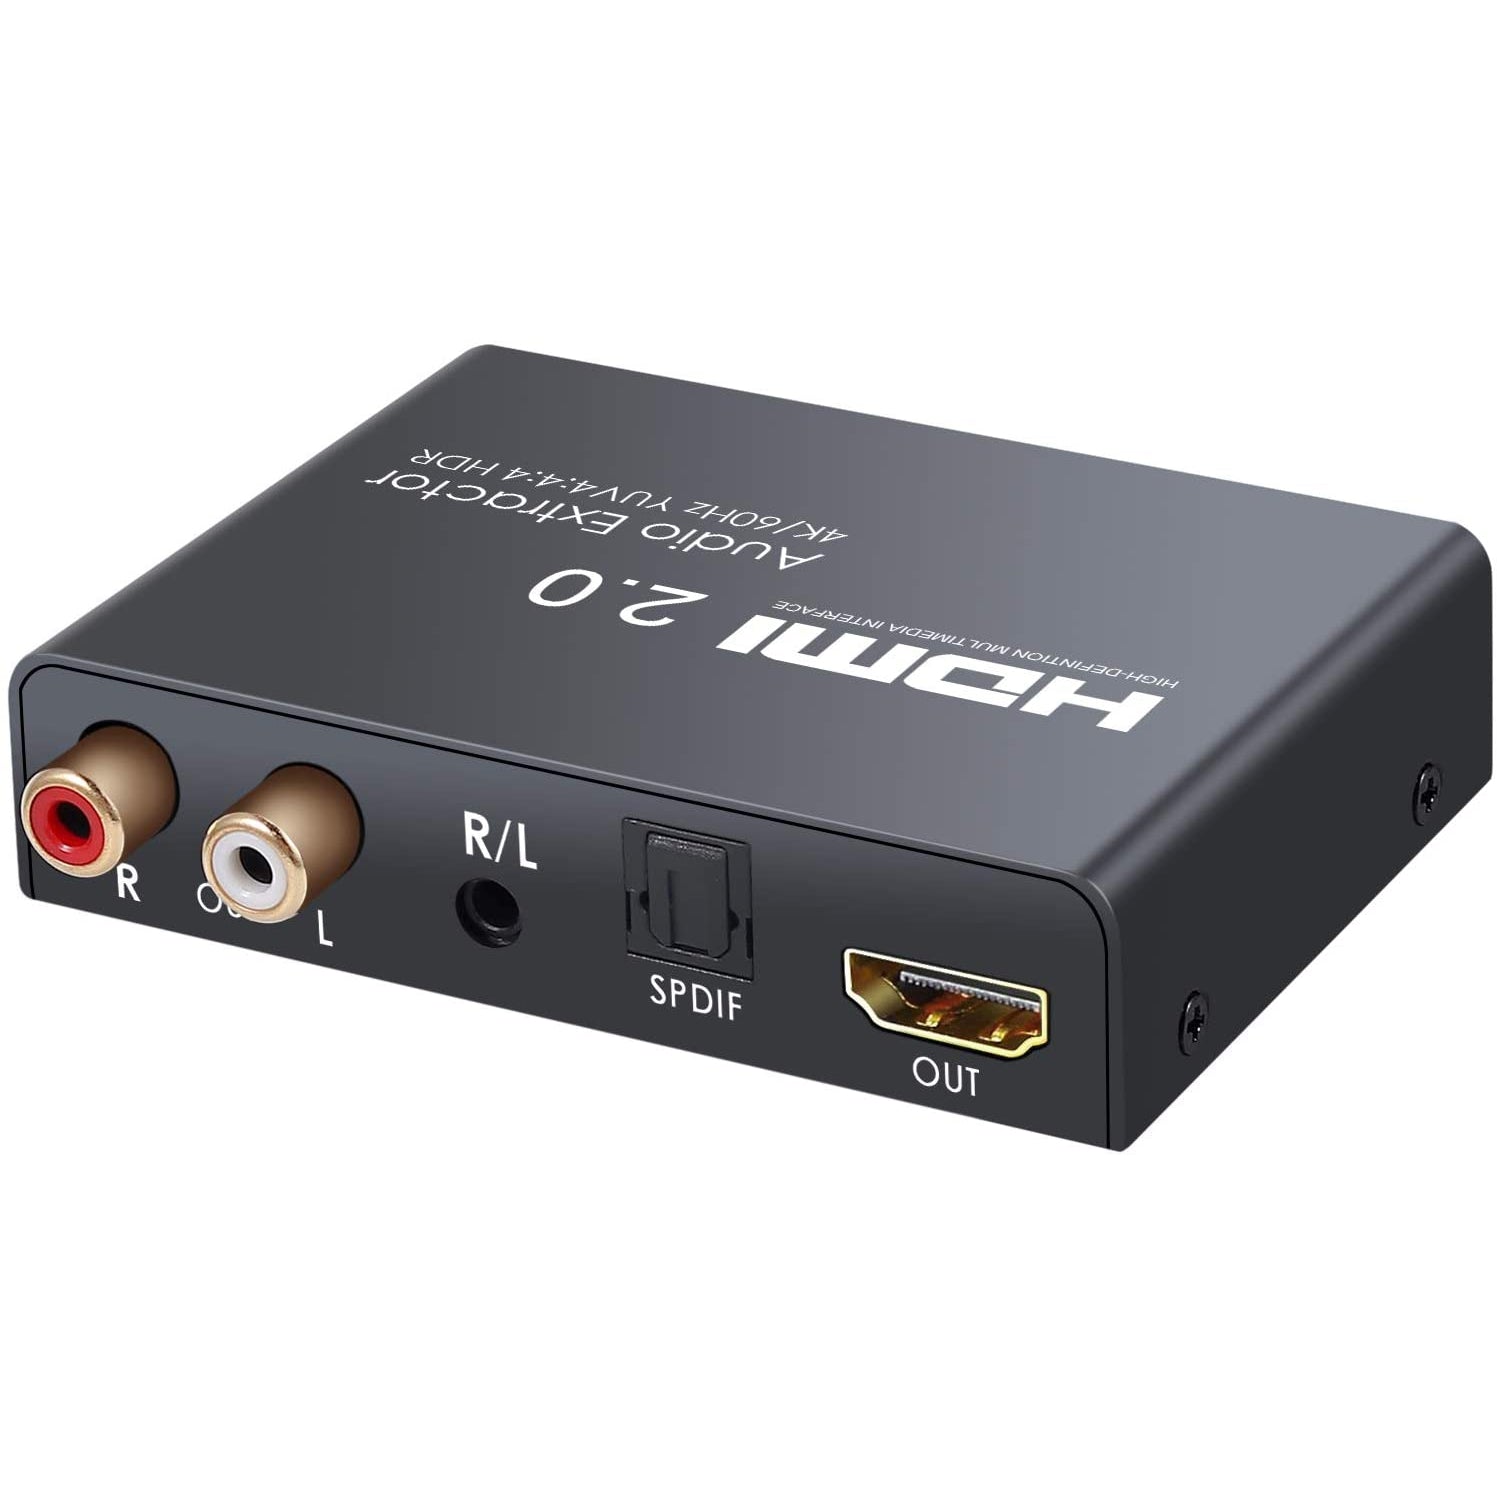 HDMI 2.0 Audio Extractor 4K / 60Hz YUV 4:4:4 and HDR Adapter